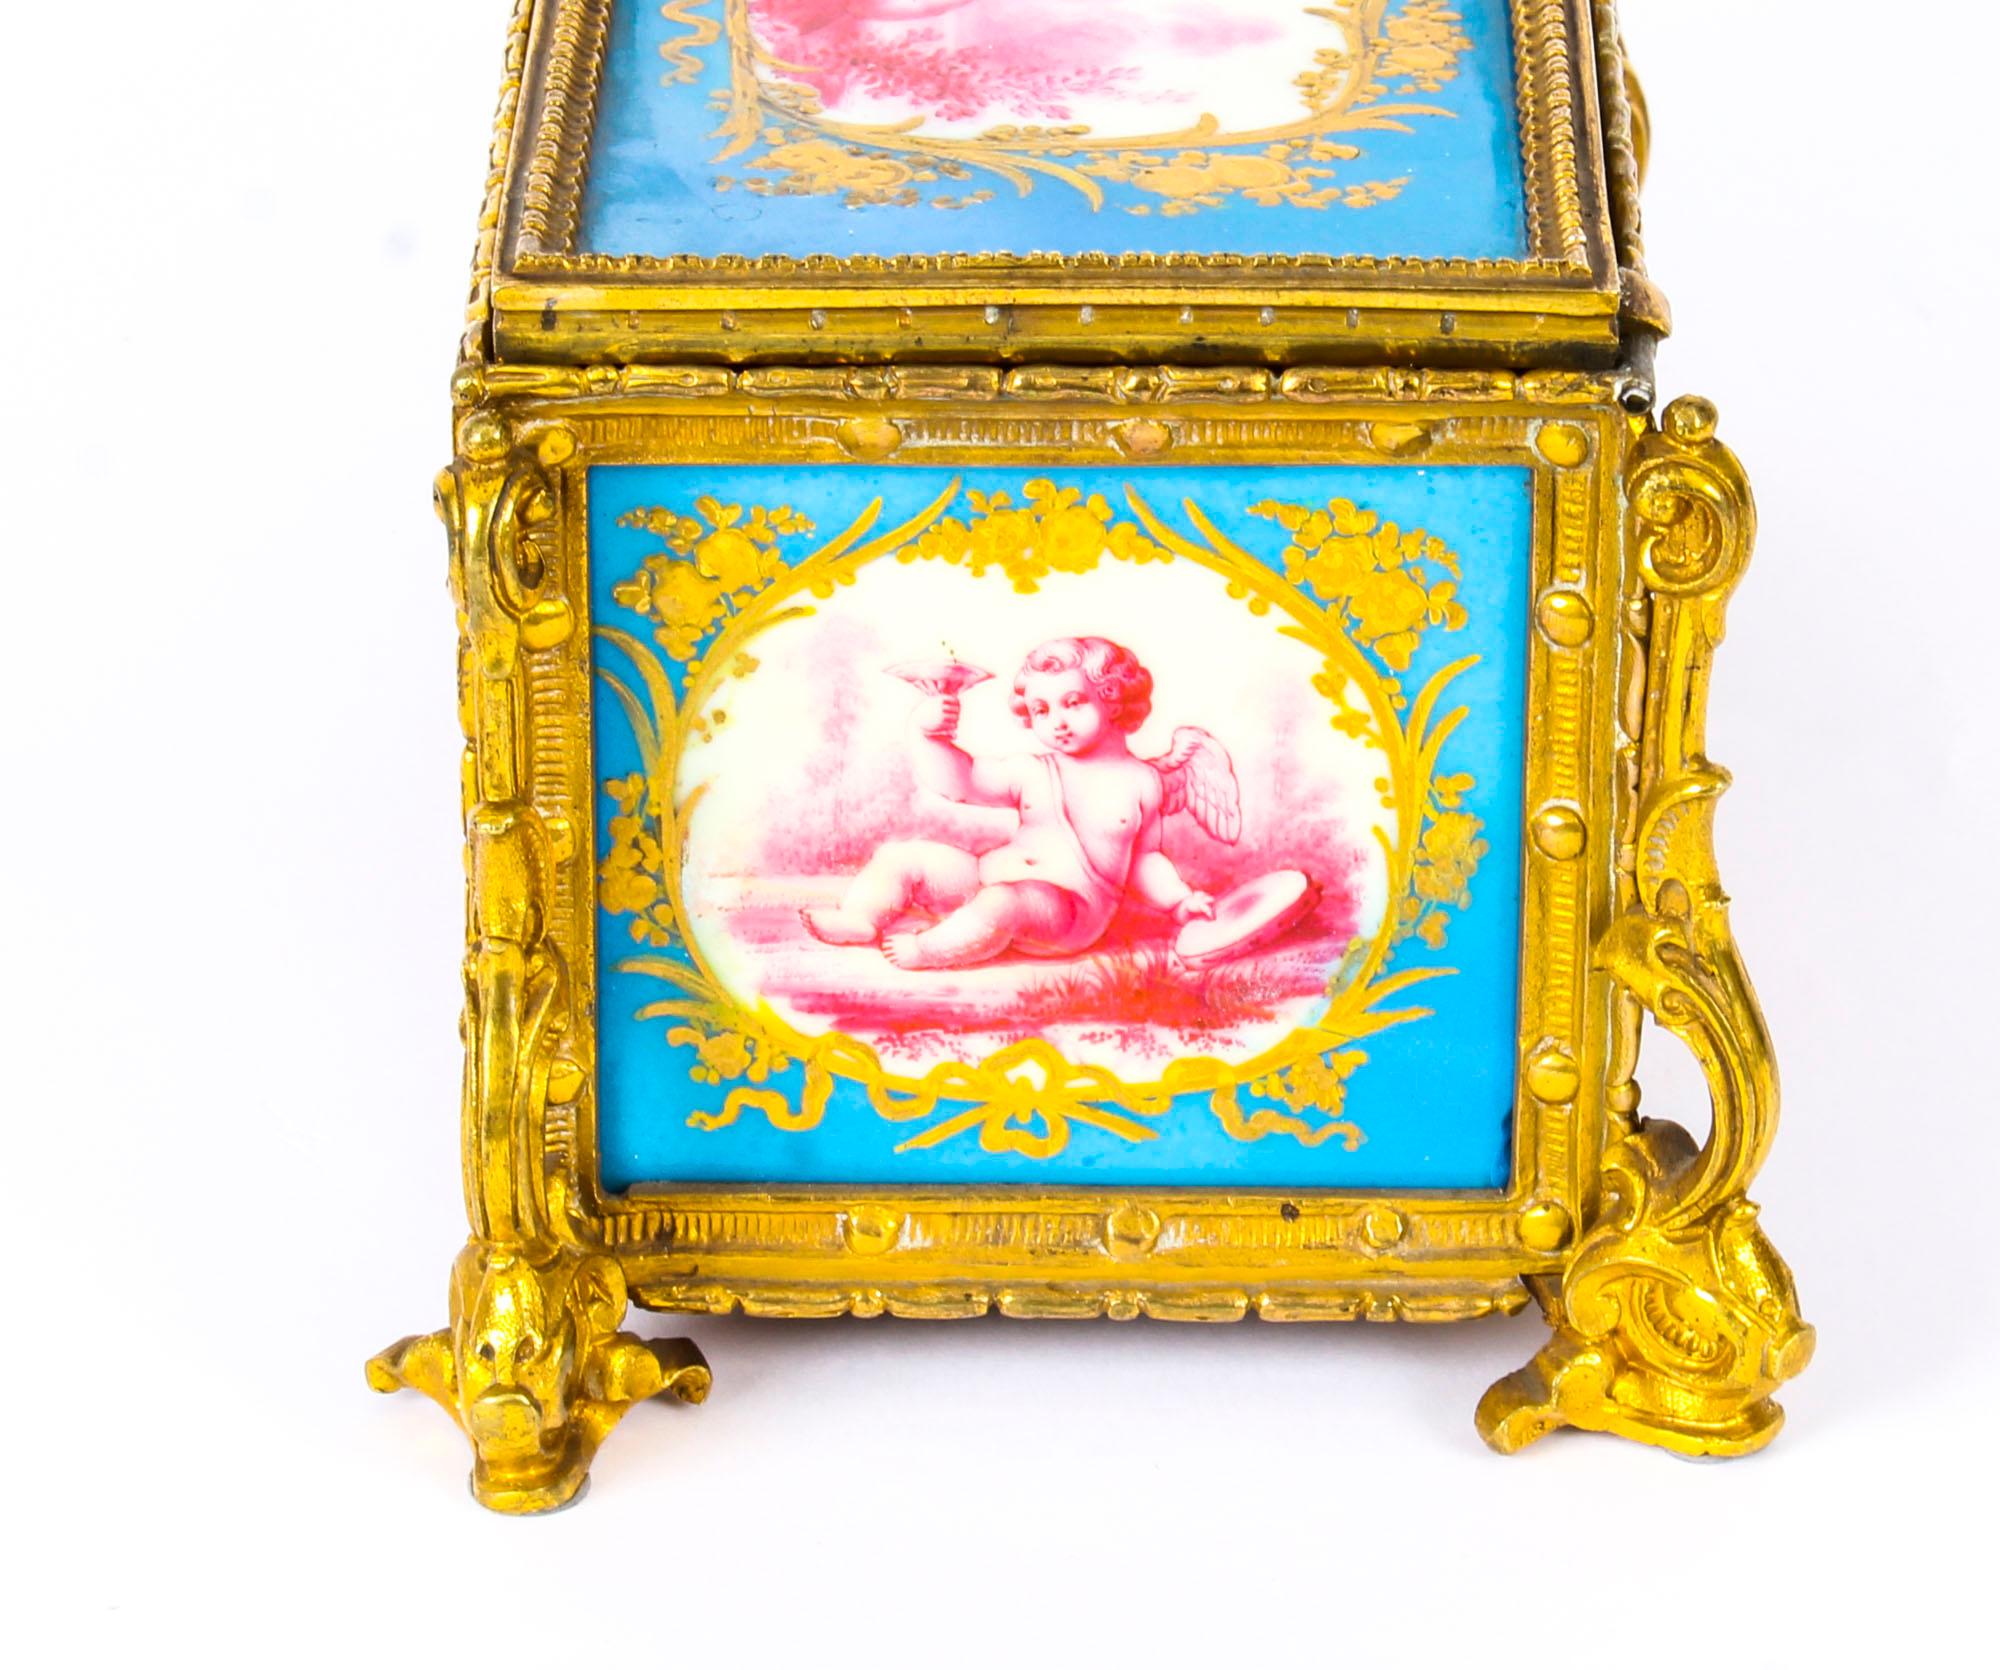 Antique French Sevres Porcelain and Ormolu Jewelry Casket, 19th Century For Sale 3